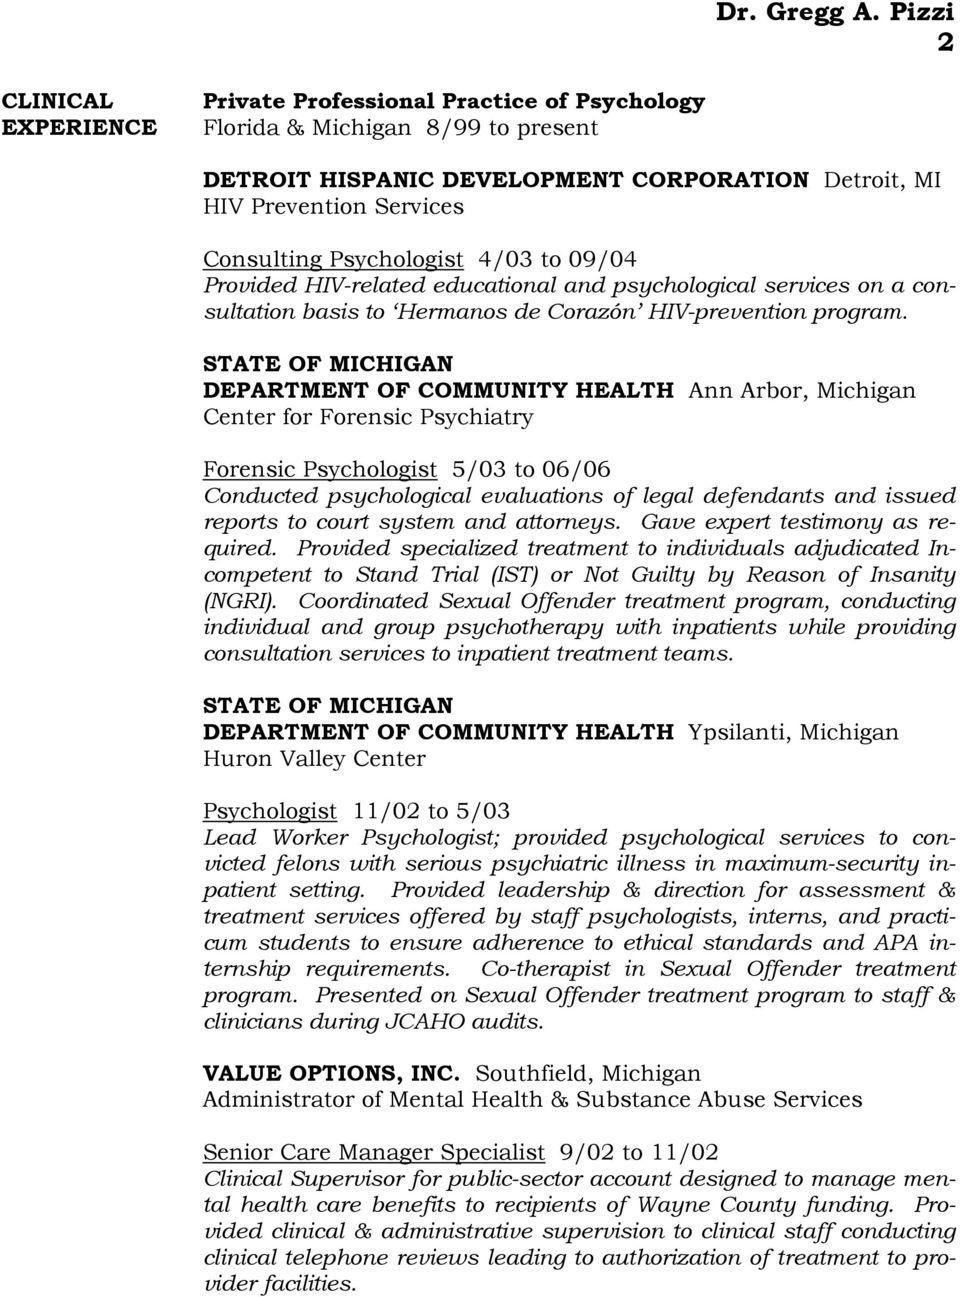 STATE OF MICHIGAN DEPARTMENT OF COMMUNITY HEALTH Ann Arbor, Michigan Center for Forensic Psychiatry Forensic Psychologist 5/03 to 06/06 Conducted psychological evaluations of legal defendants and